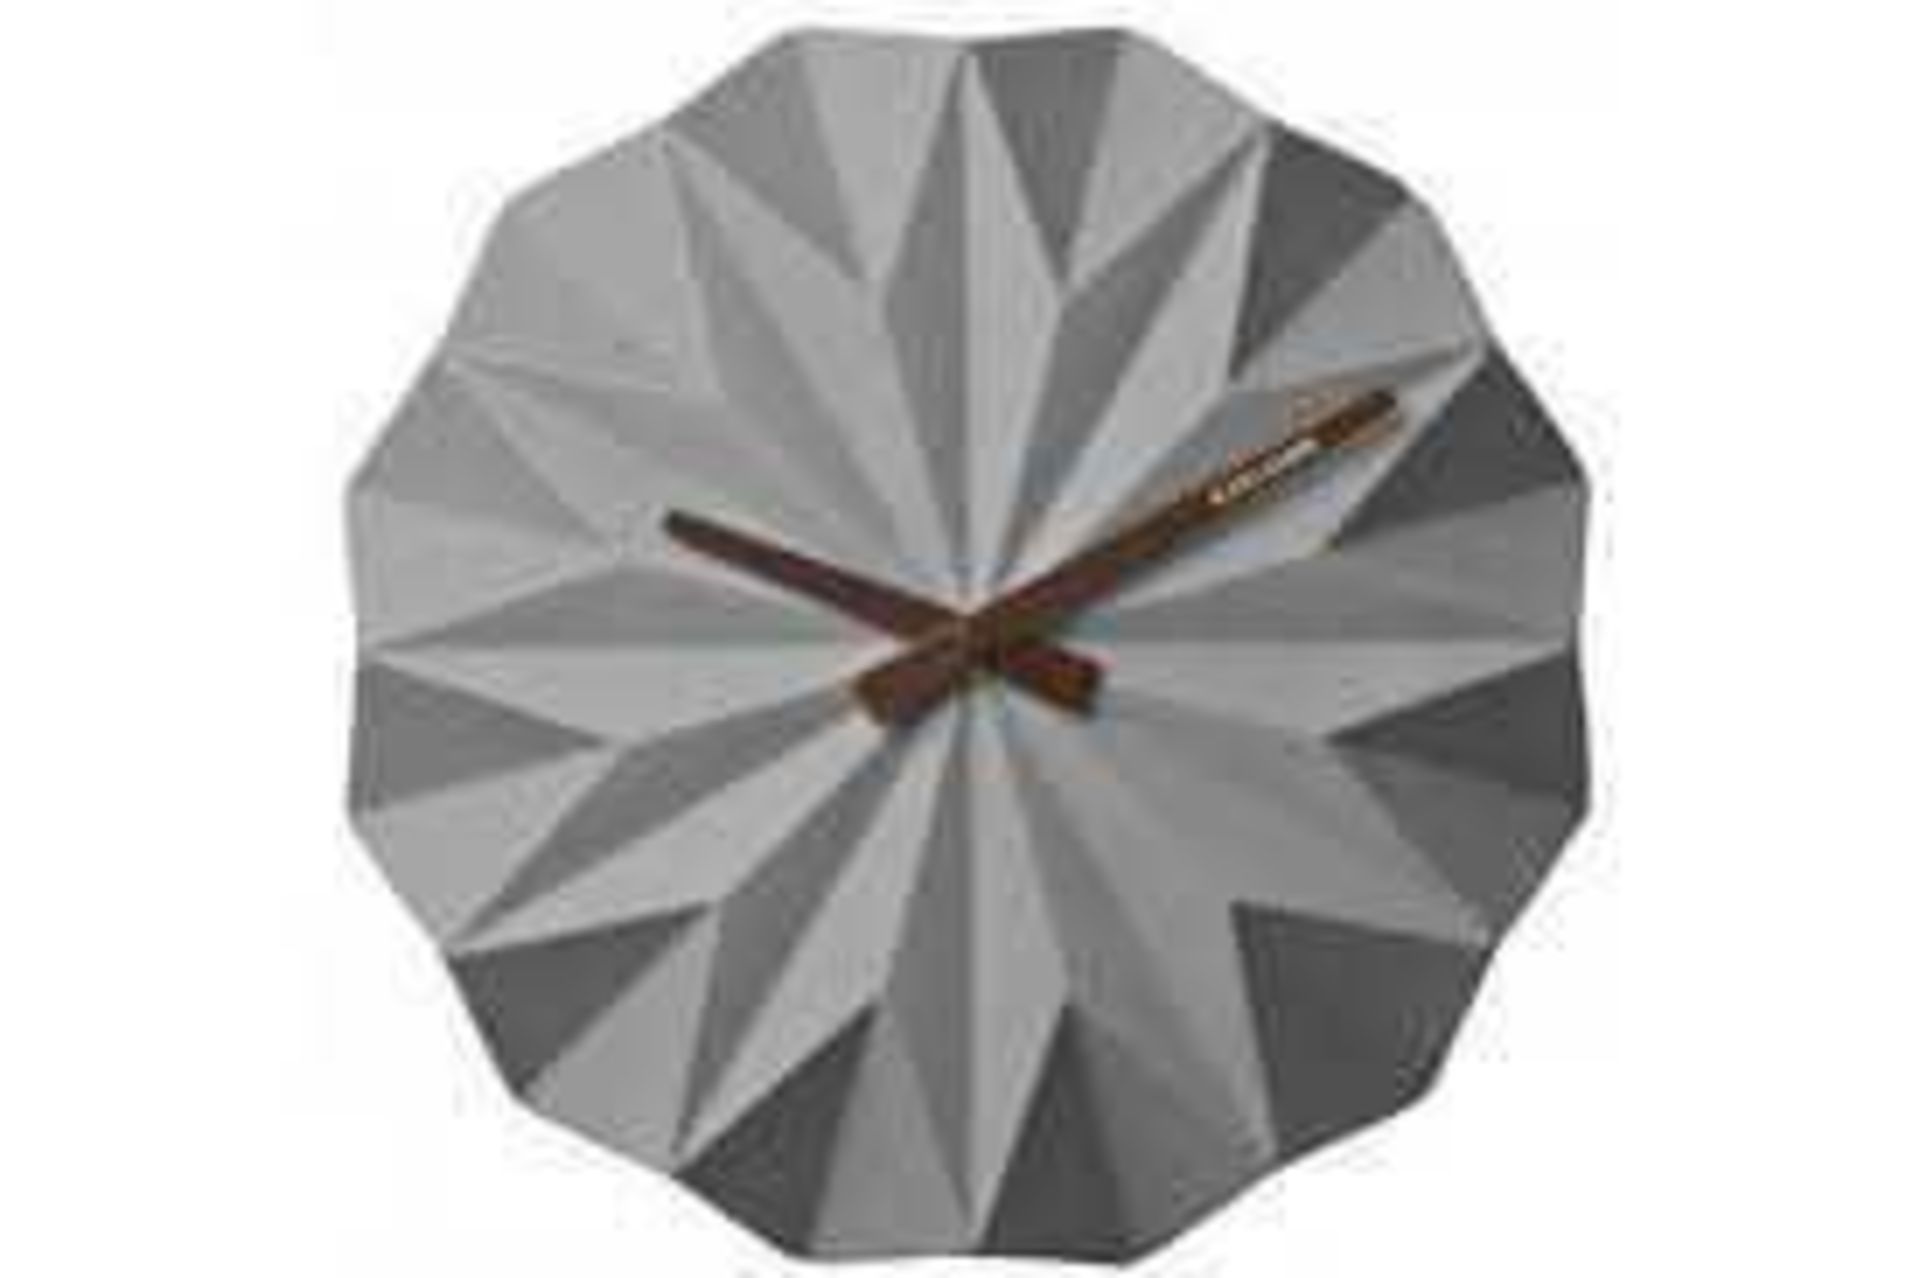 Combined Rrp £100 Lot To Contain 3 Assorted Wall Clocks To Include 2 Hexagonal Shaped Small Wall Clo